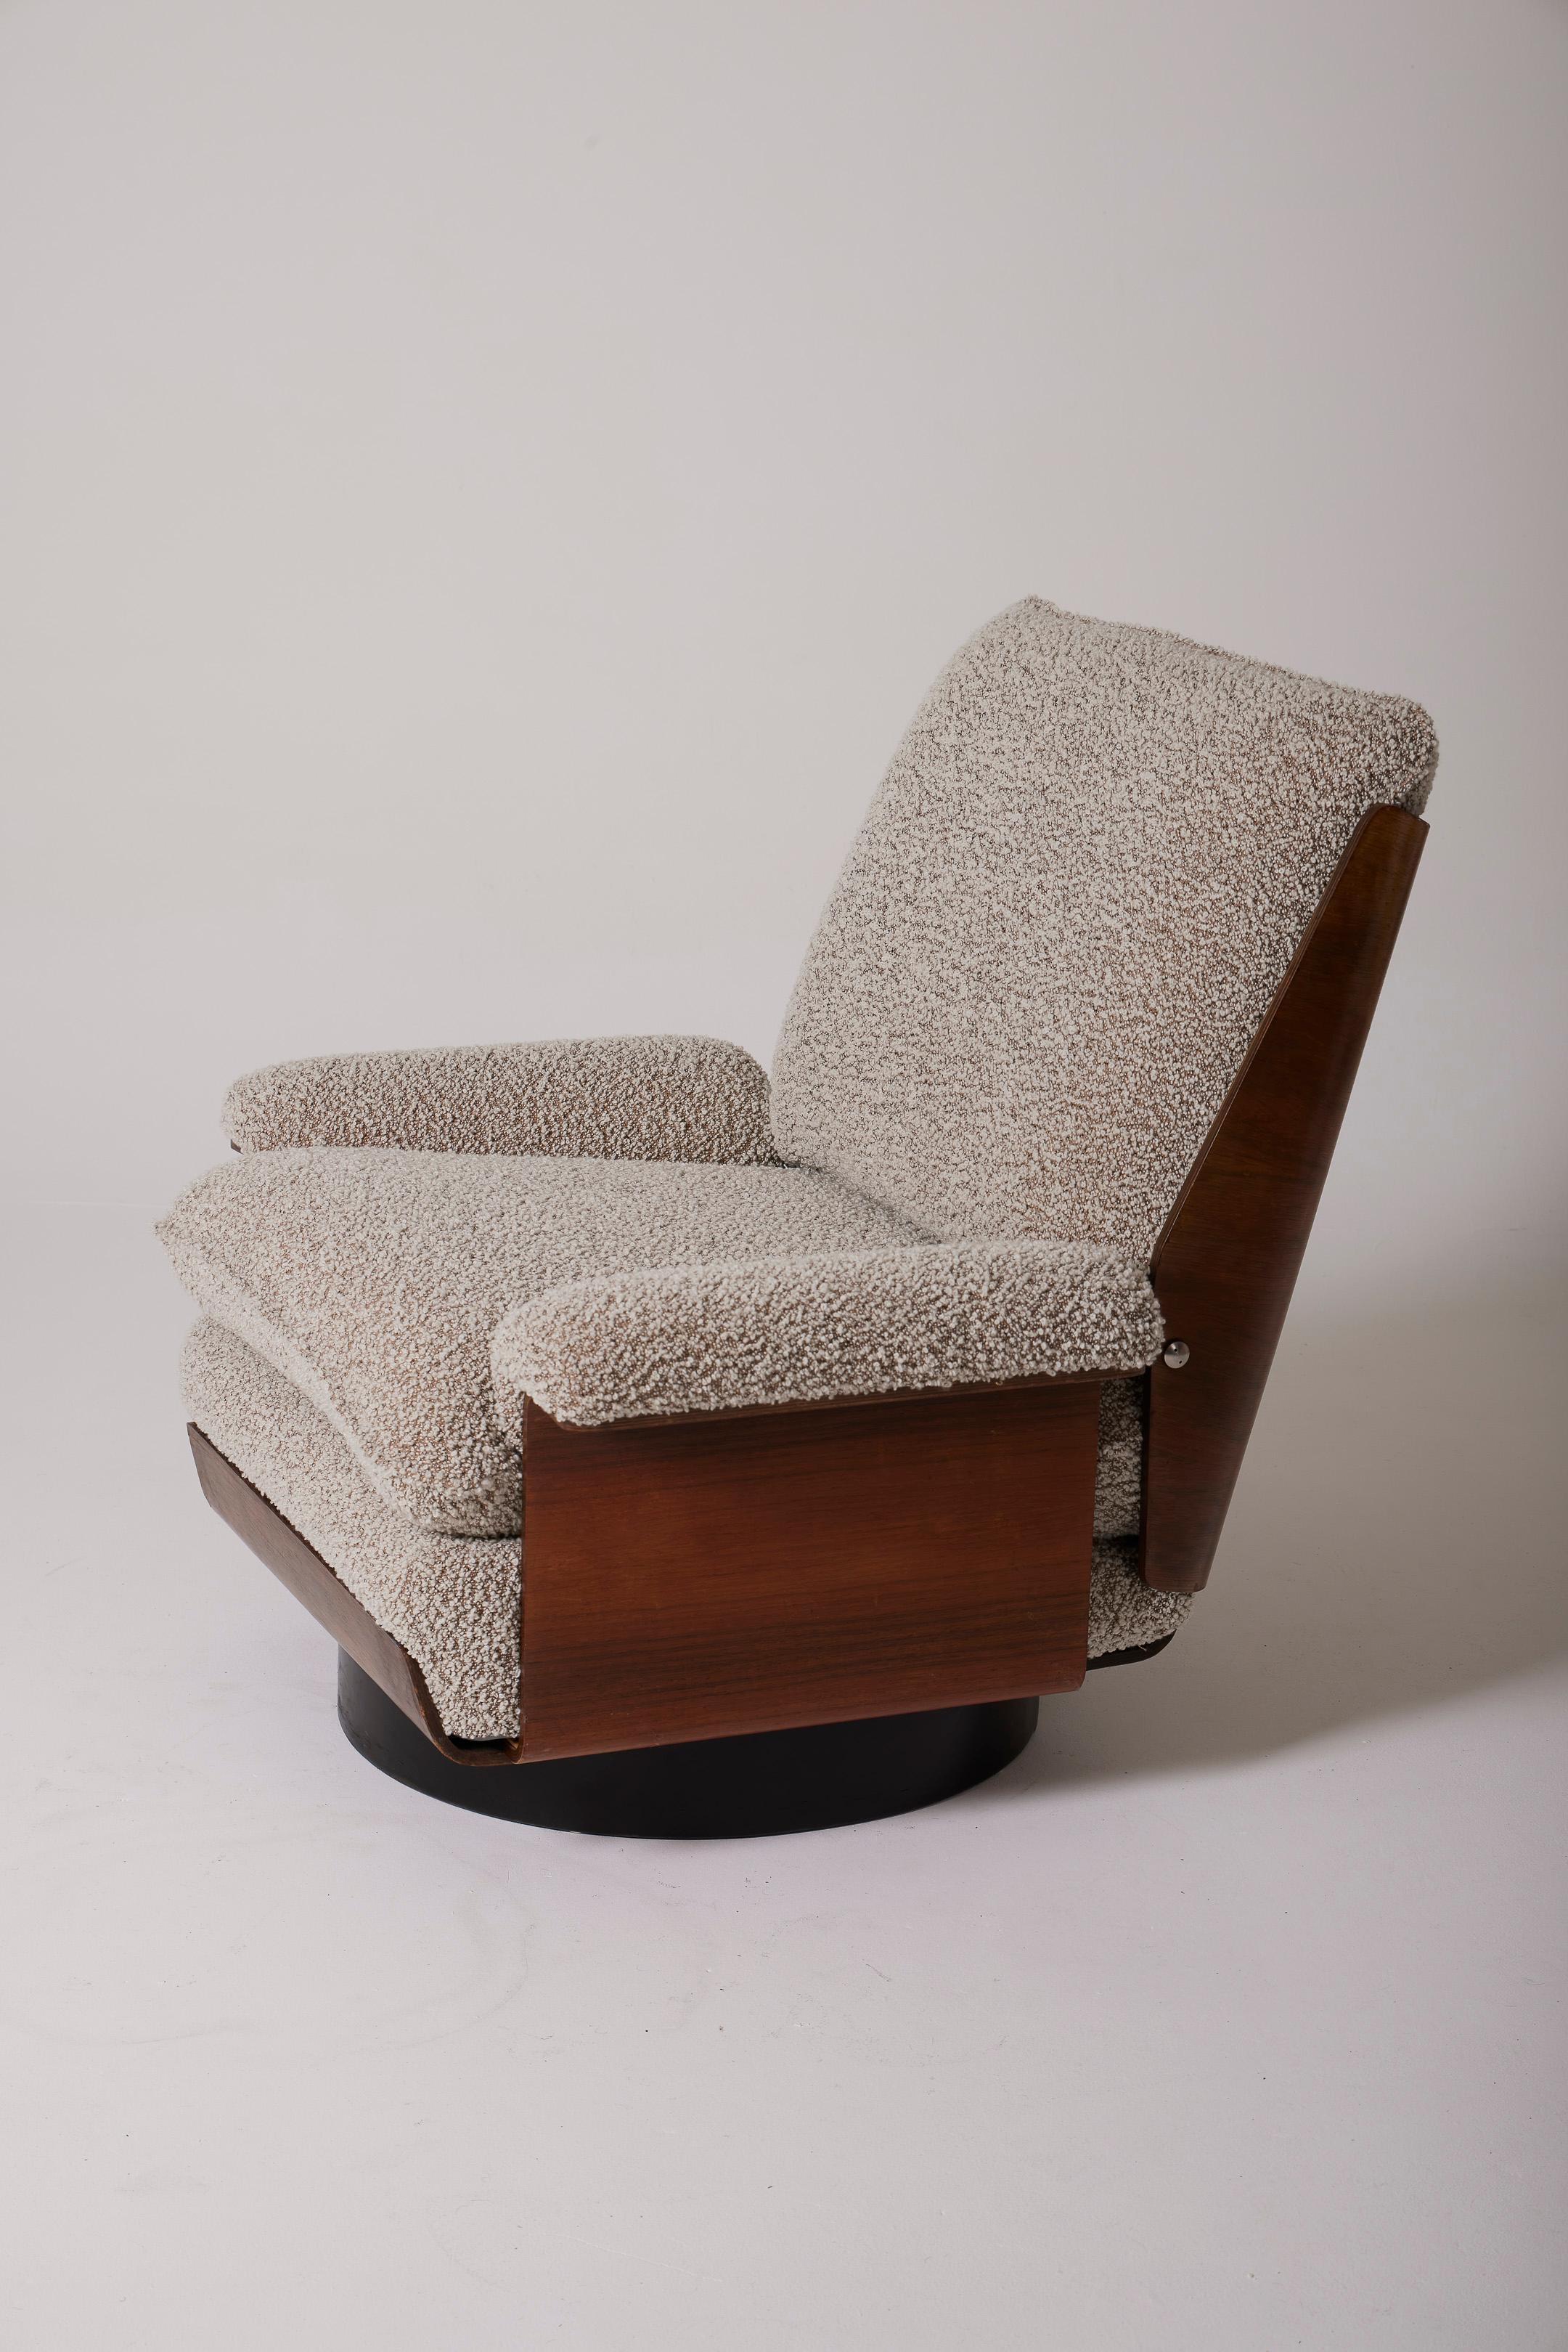 Viborg chair model designed by Bernard Brunier for Coulon dating back to the 1970s. The shell is made of Rio rosewood veneer. The cylindrical base is in blackened wood. The seat, backrest, and armrests have been reupholstered with high-quality gray